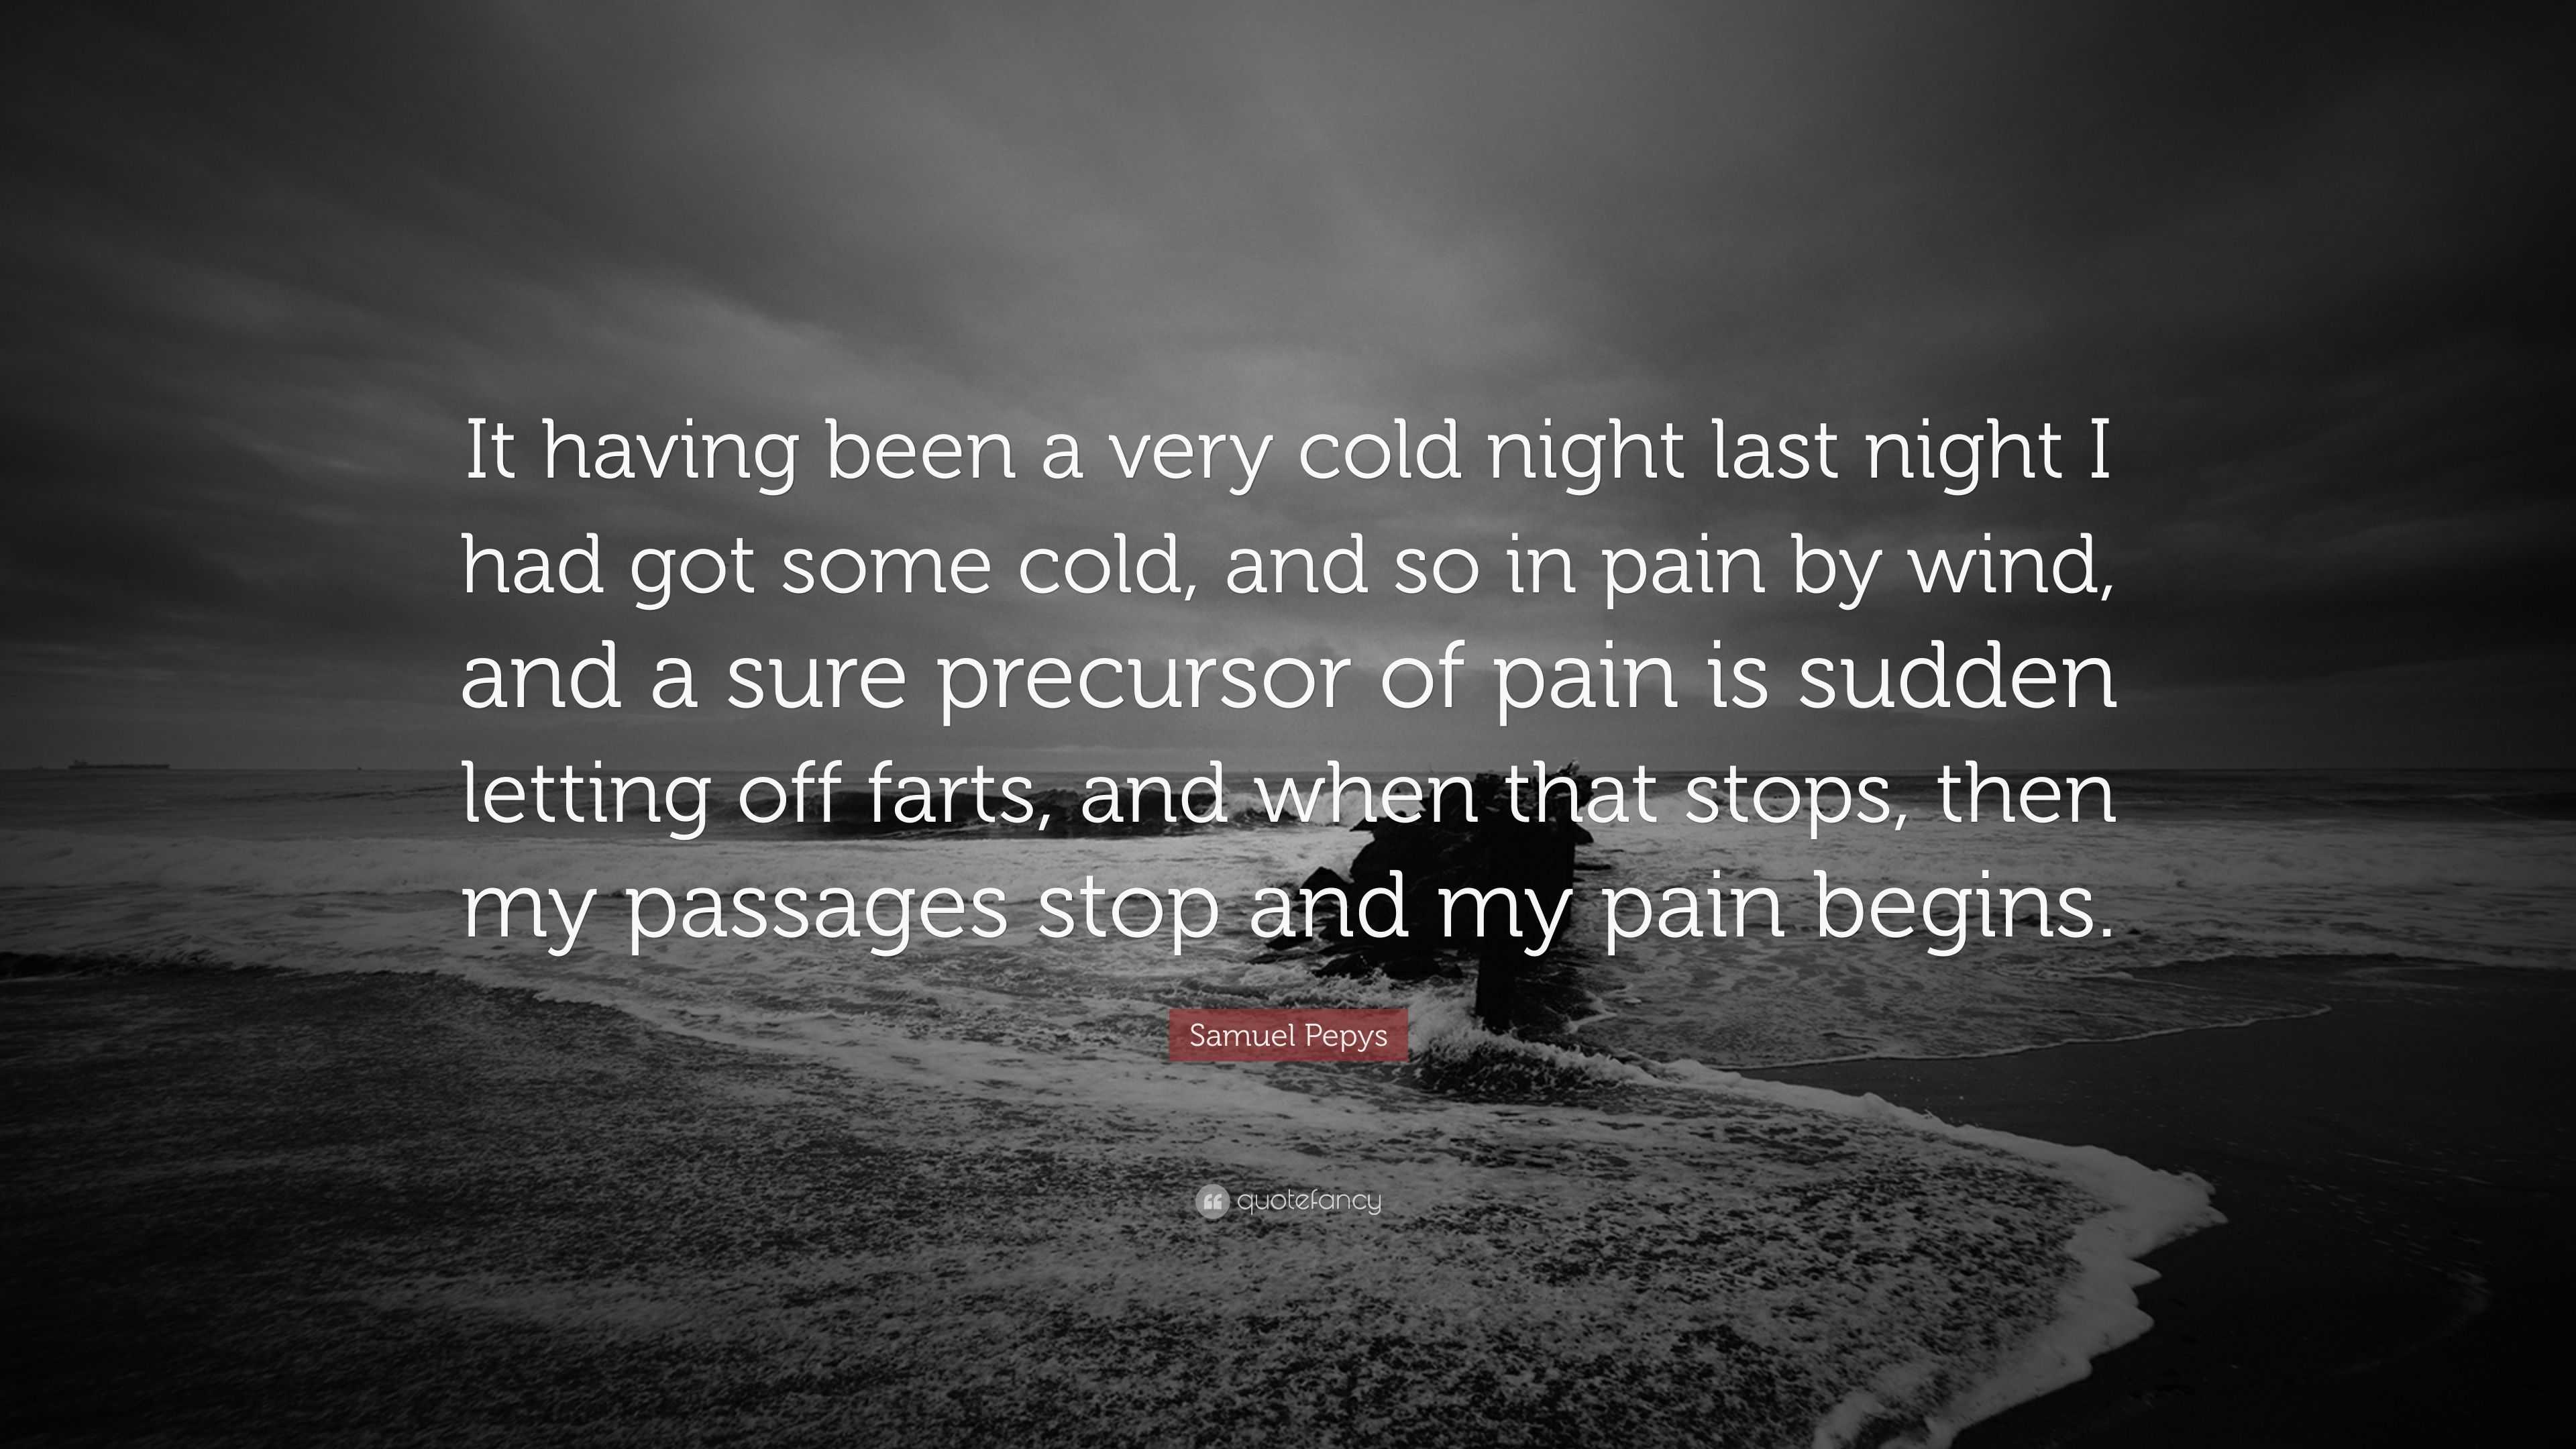 Samuel Pepys Quote: “It having been a very cold night last night I had